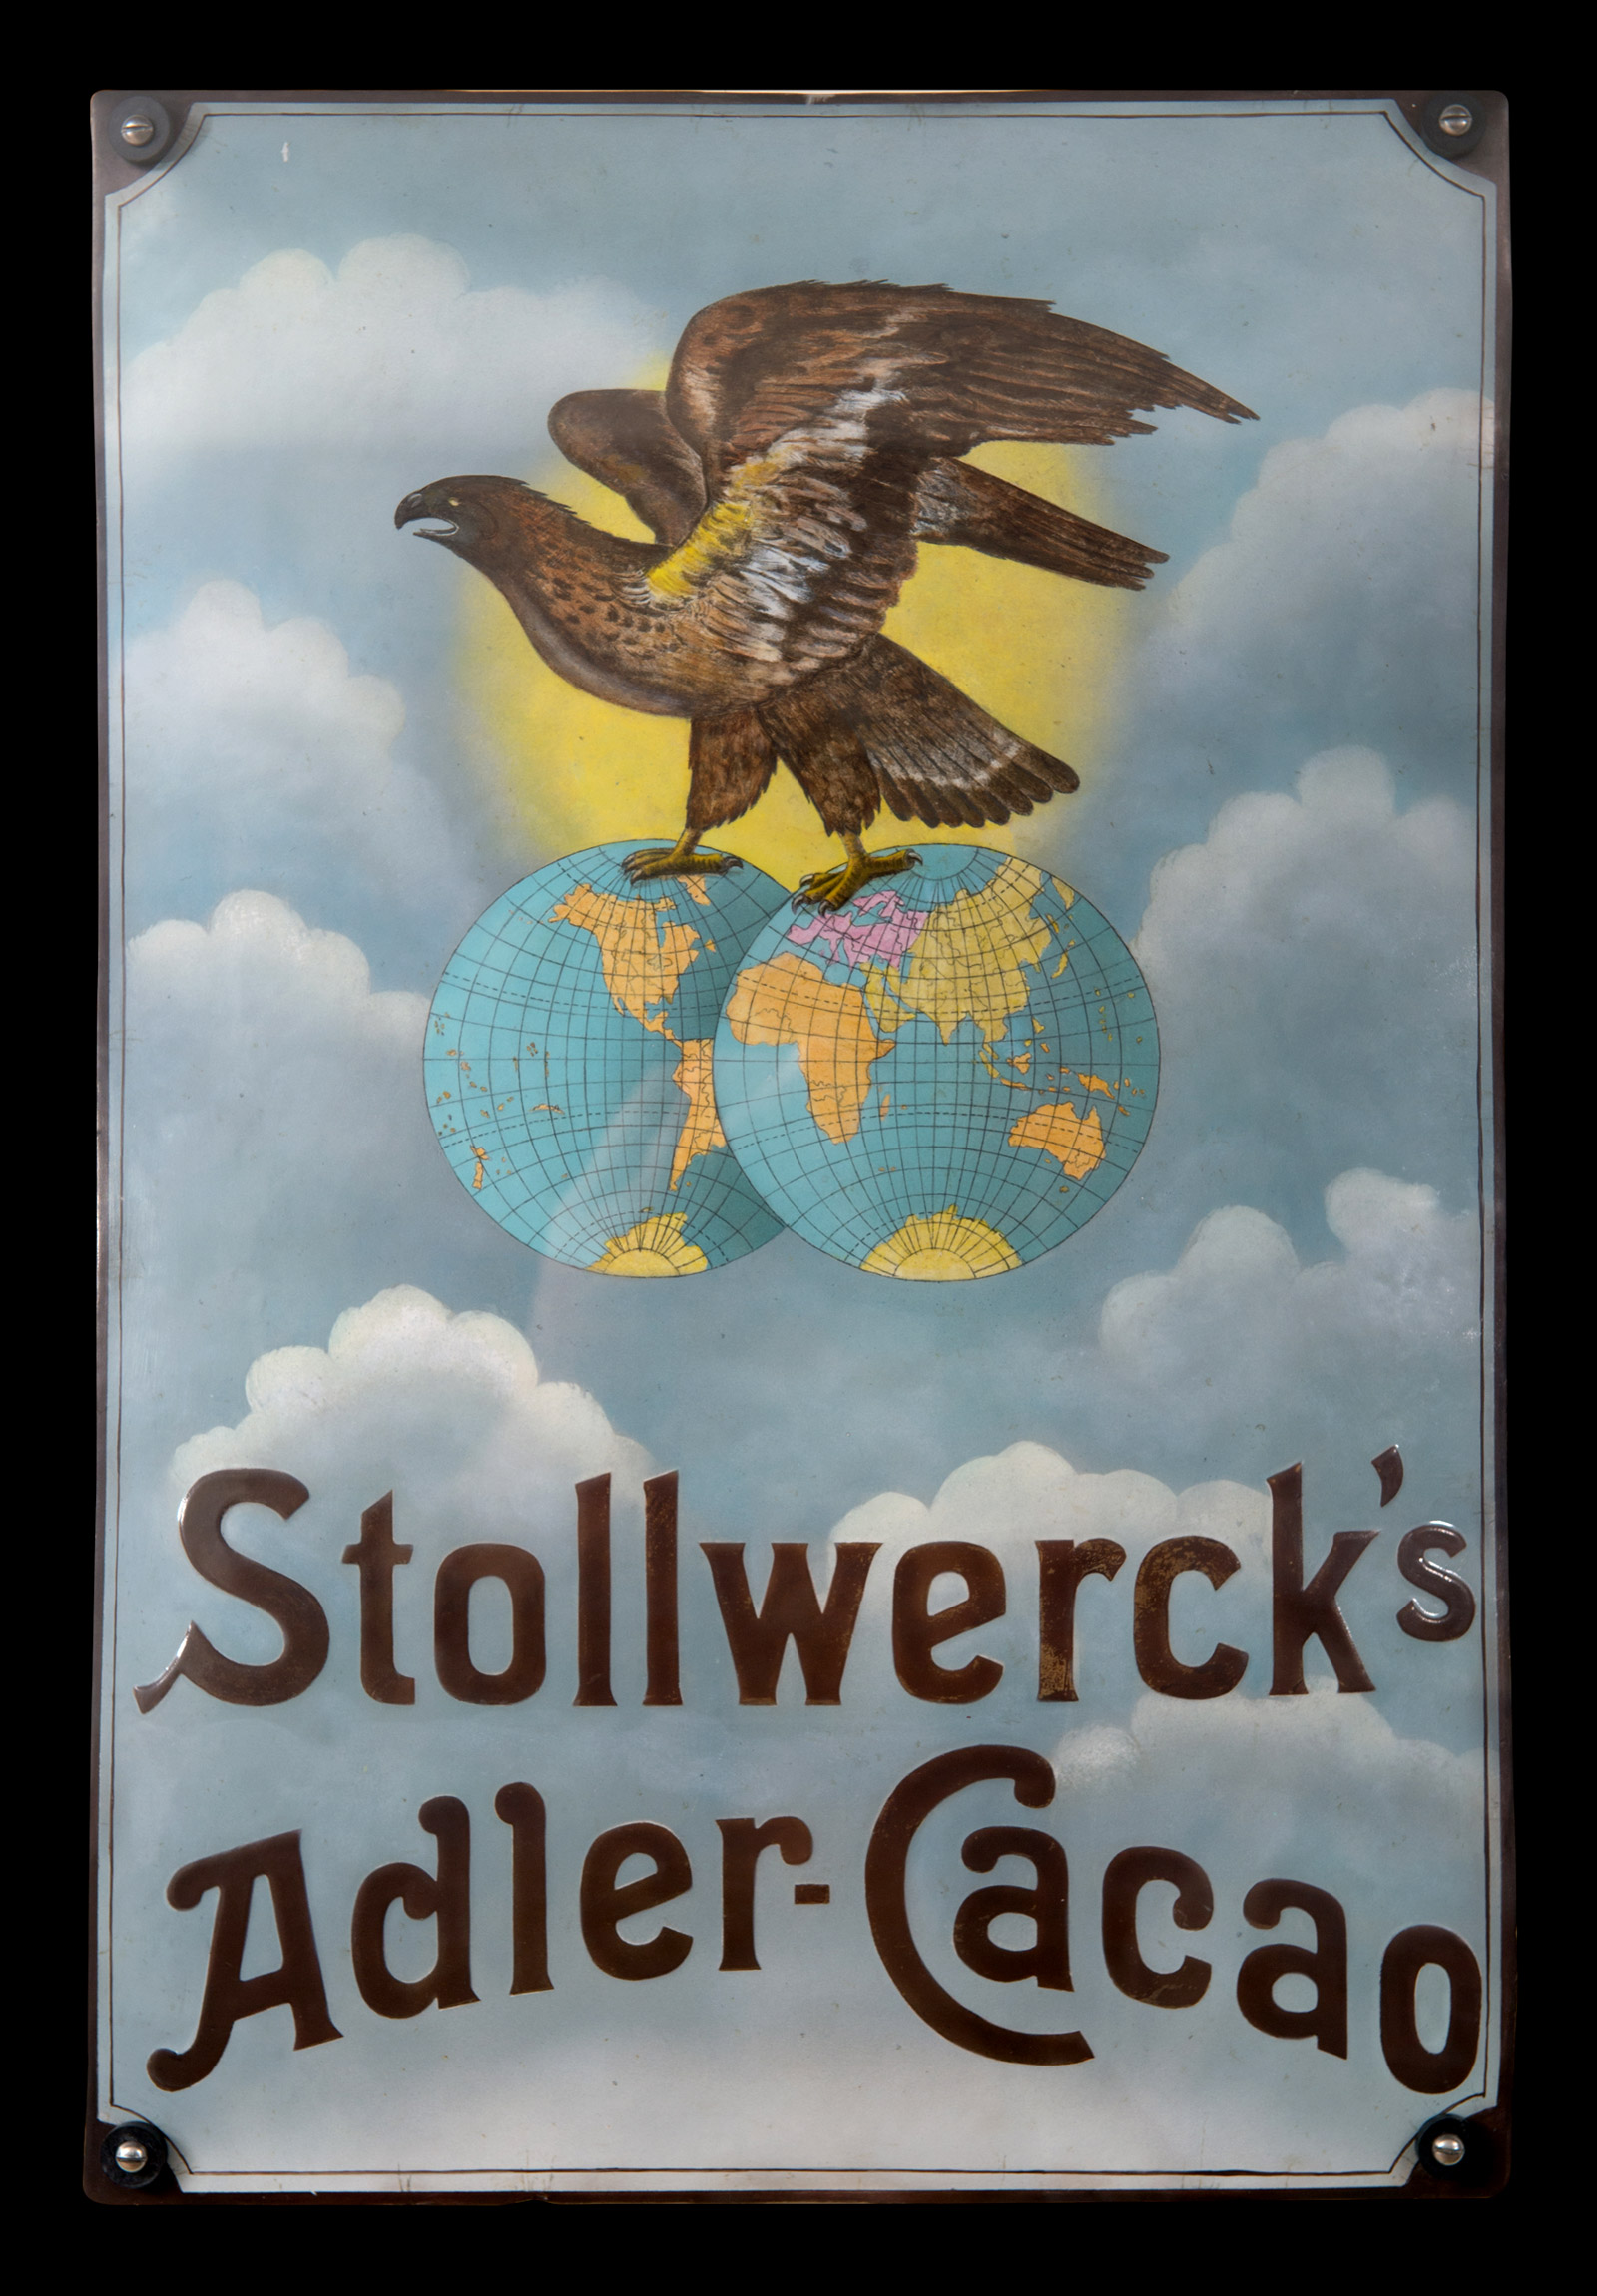 A photograph showing an enamel sign used in nineteen oh three by the Stollwerck chocolate company.